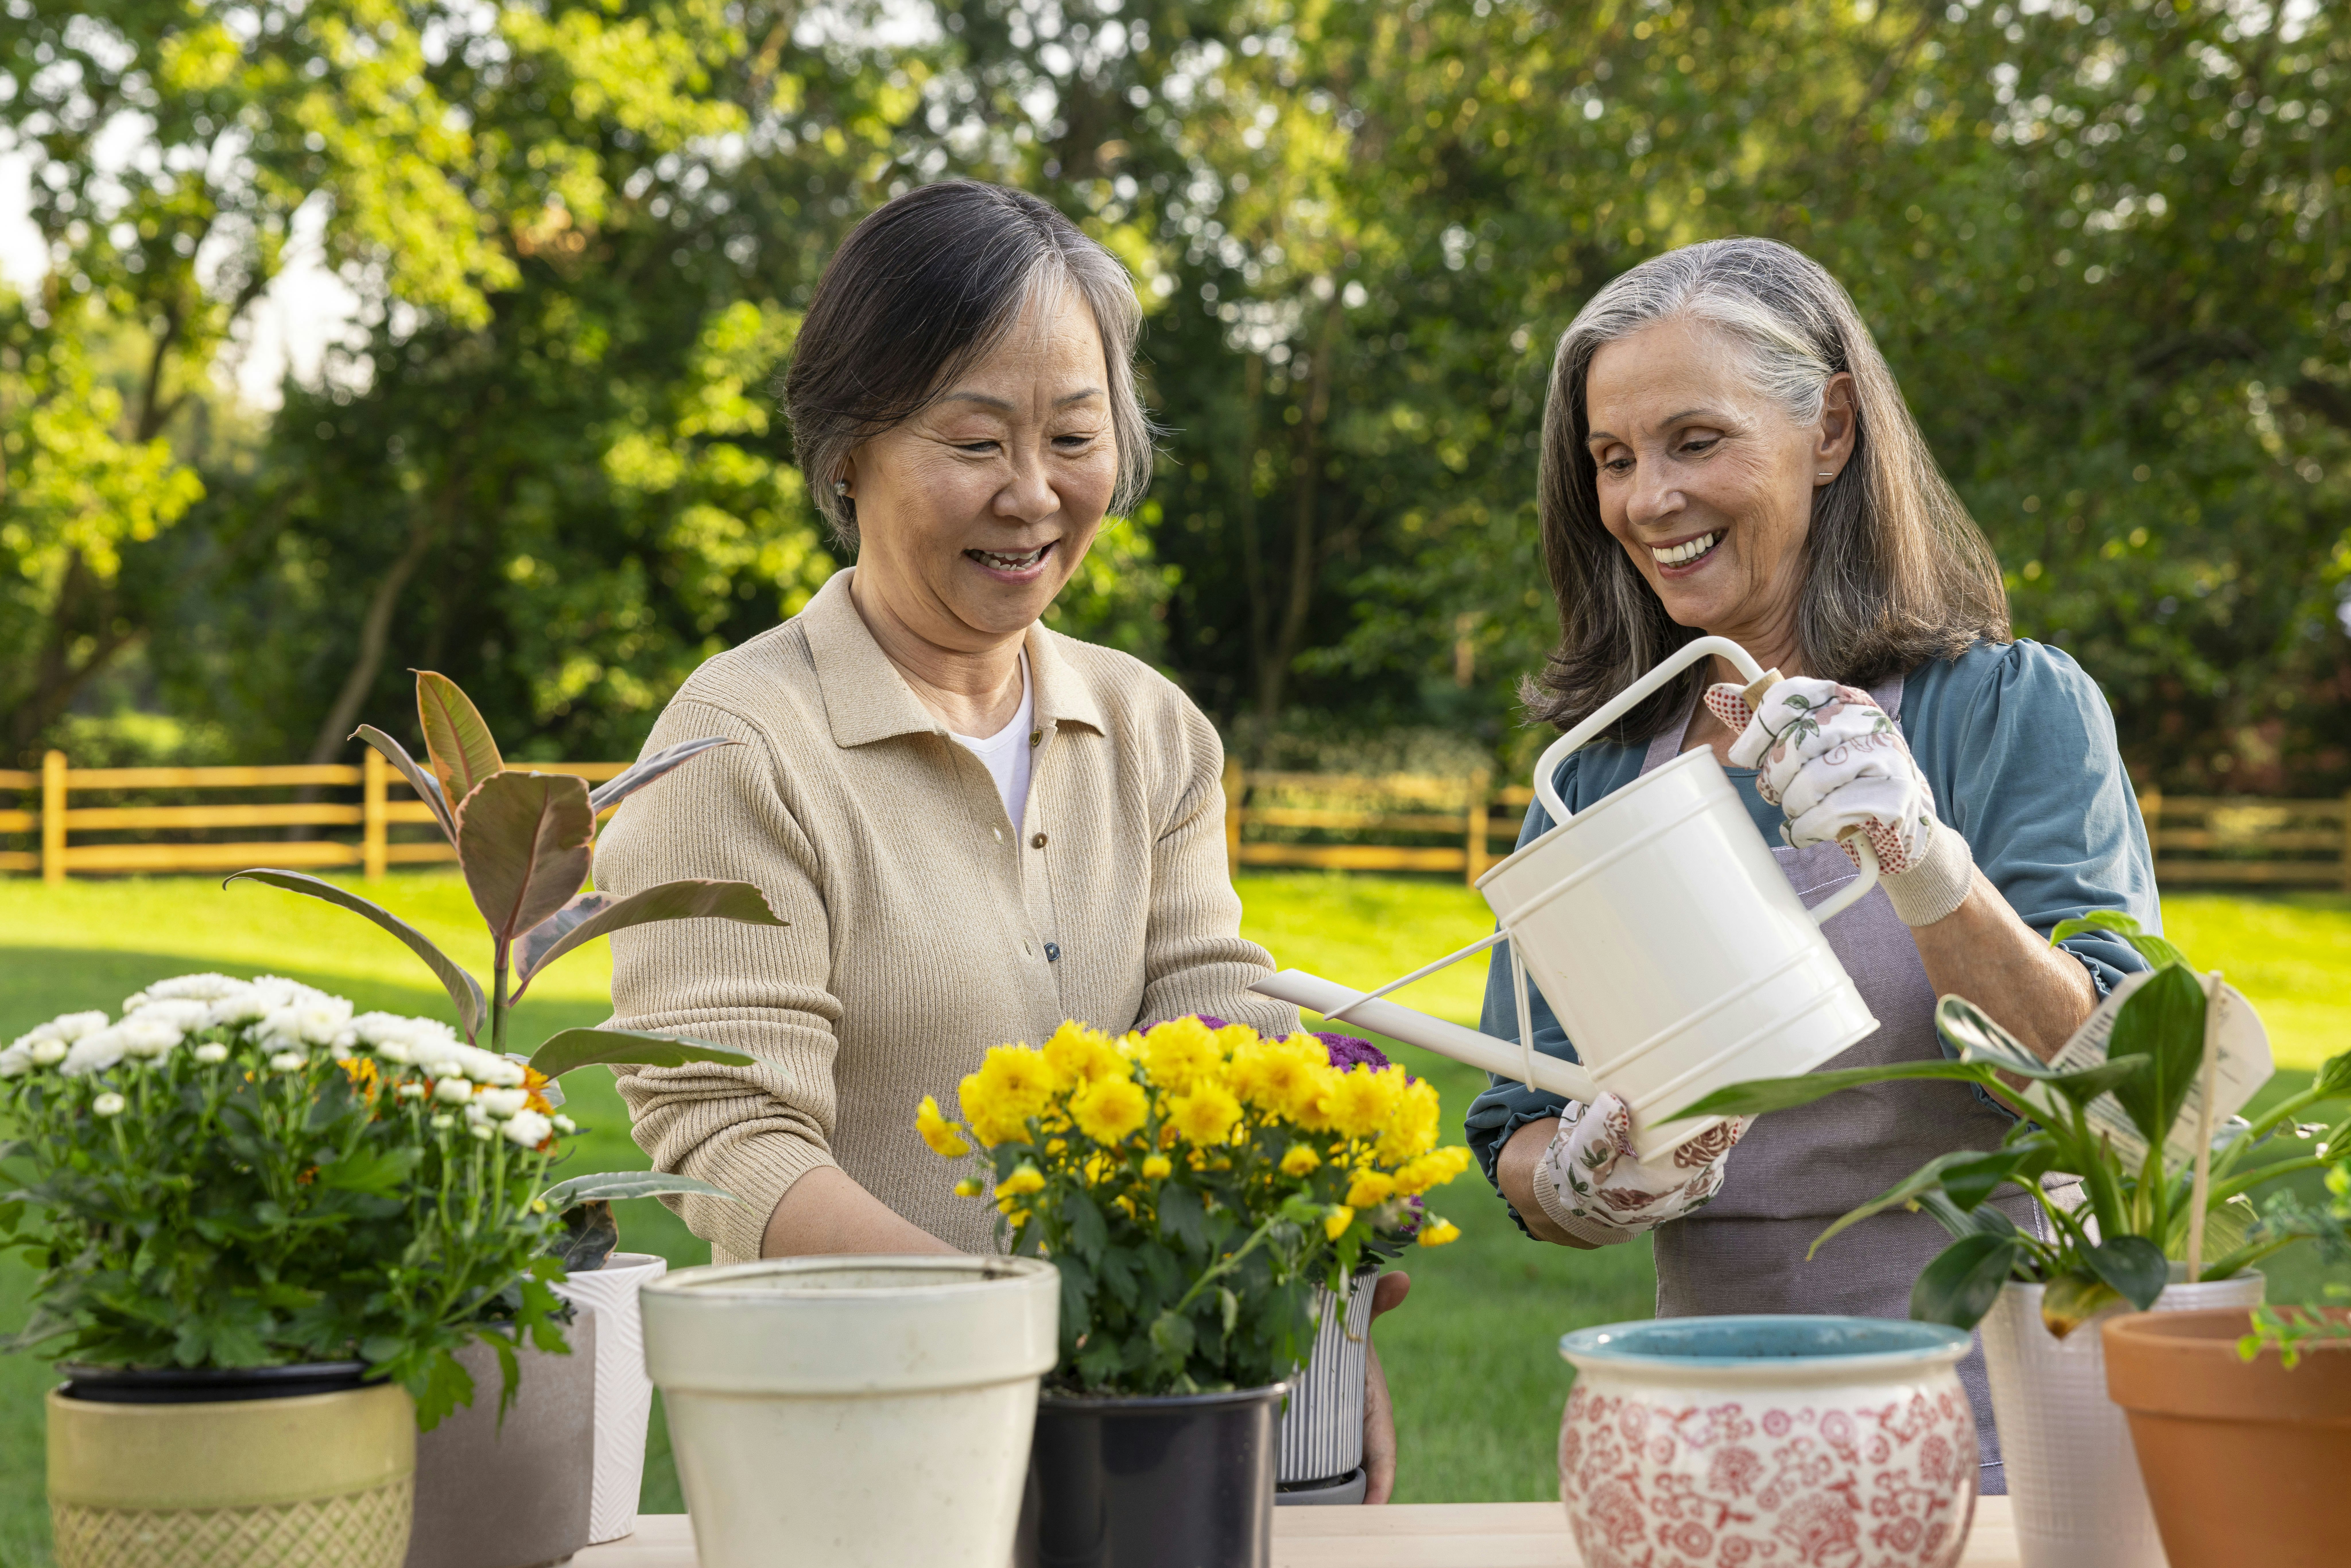 Two women tend to flowers in an outdoor setting